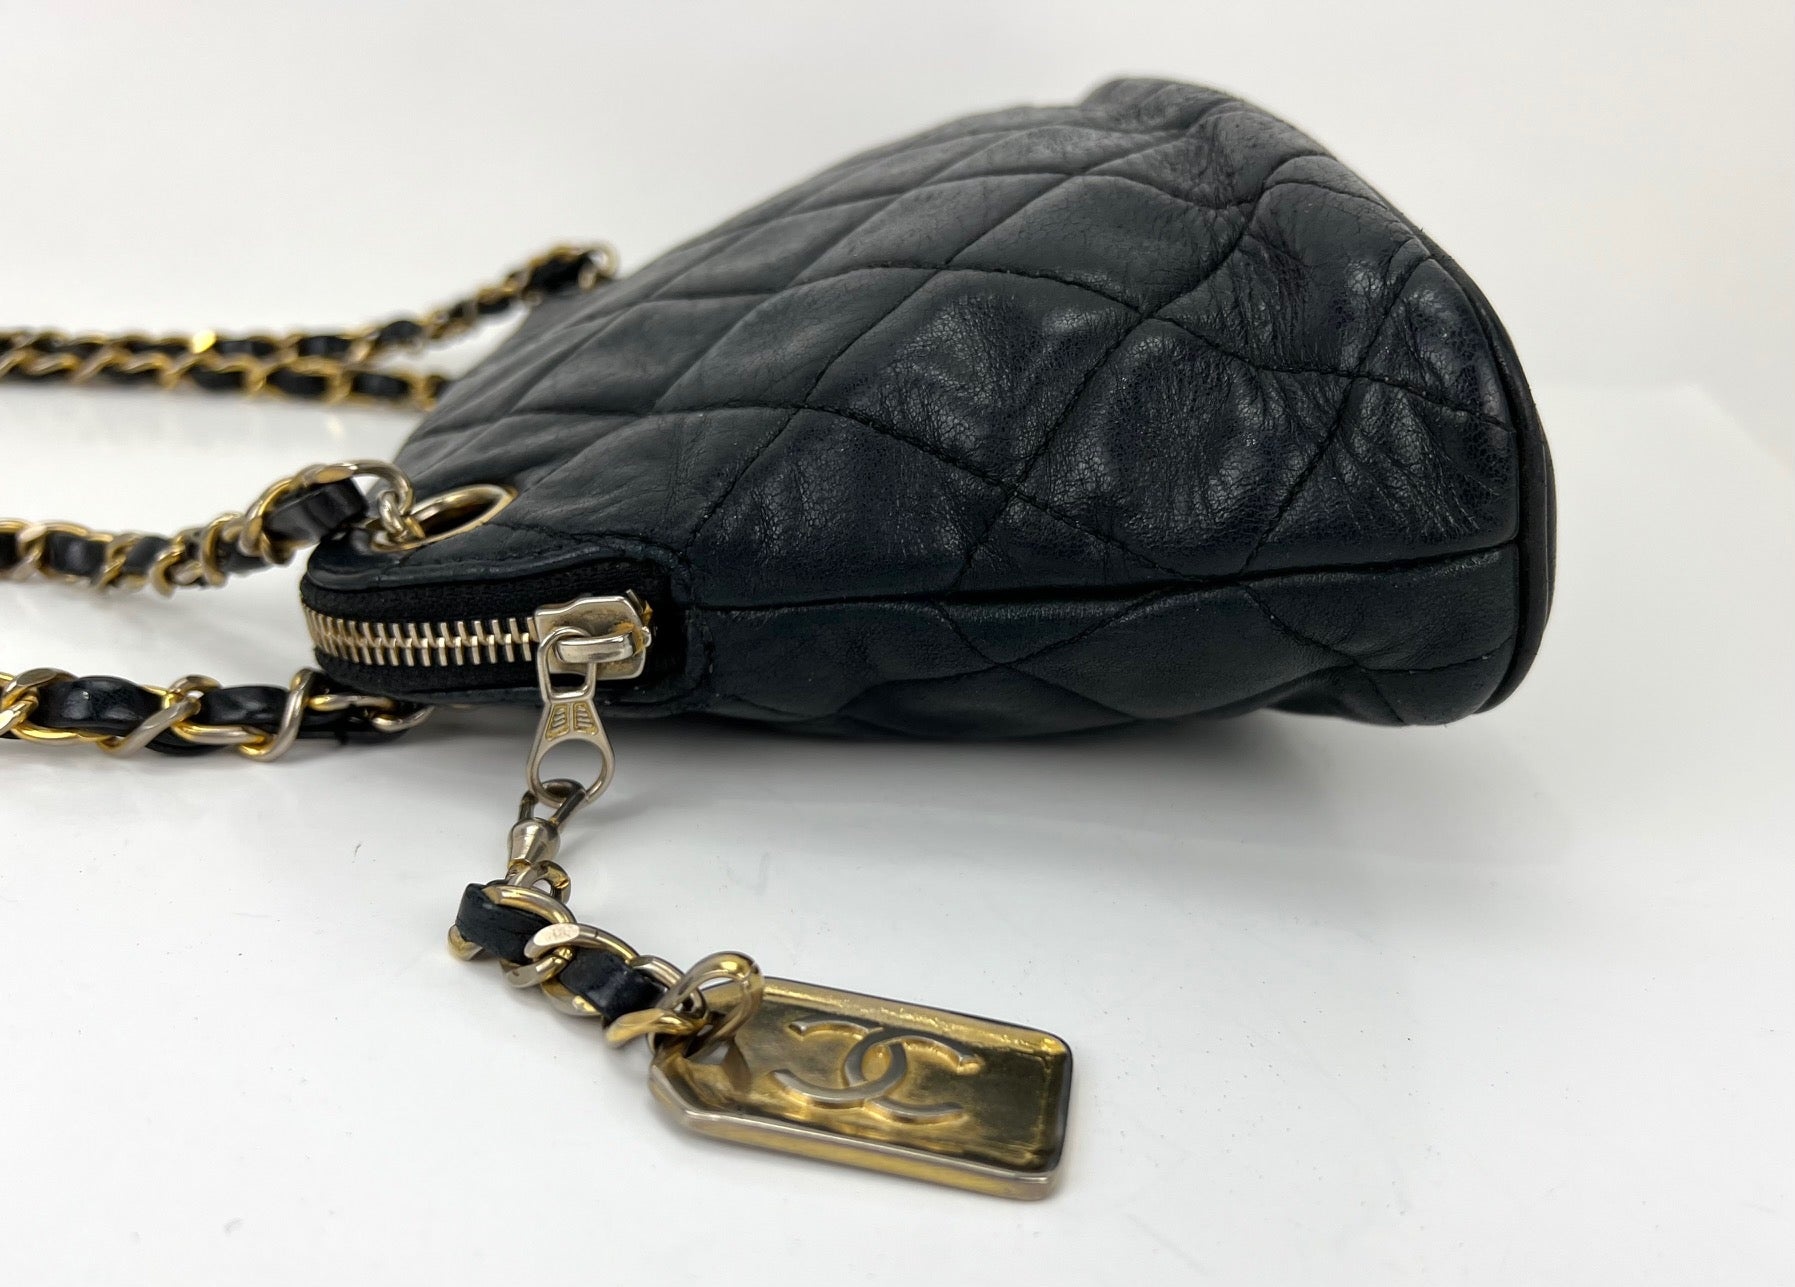 CHANEL Bag Quilted Lambskin Leather Chain Vintage Black Mini Shoulder Bag Preowned - 4